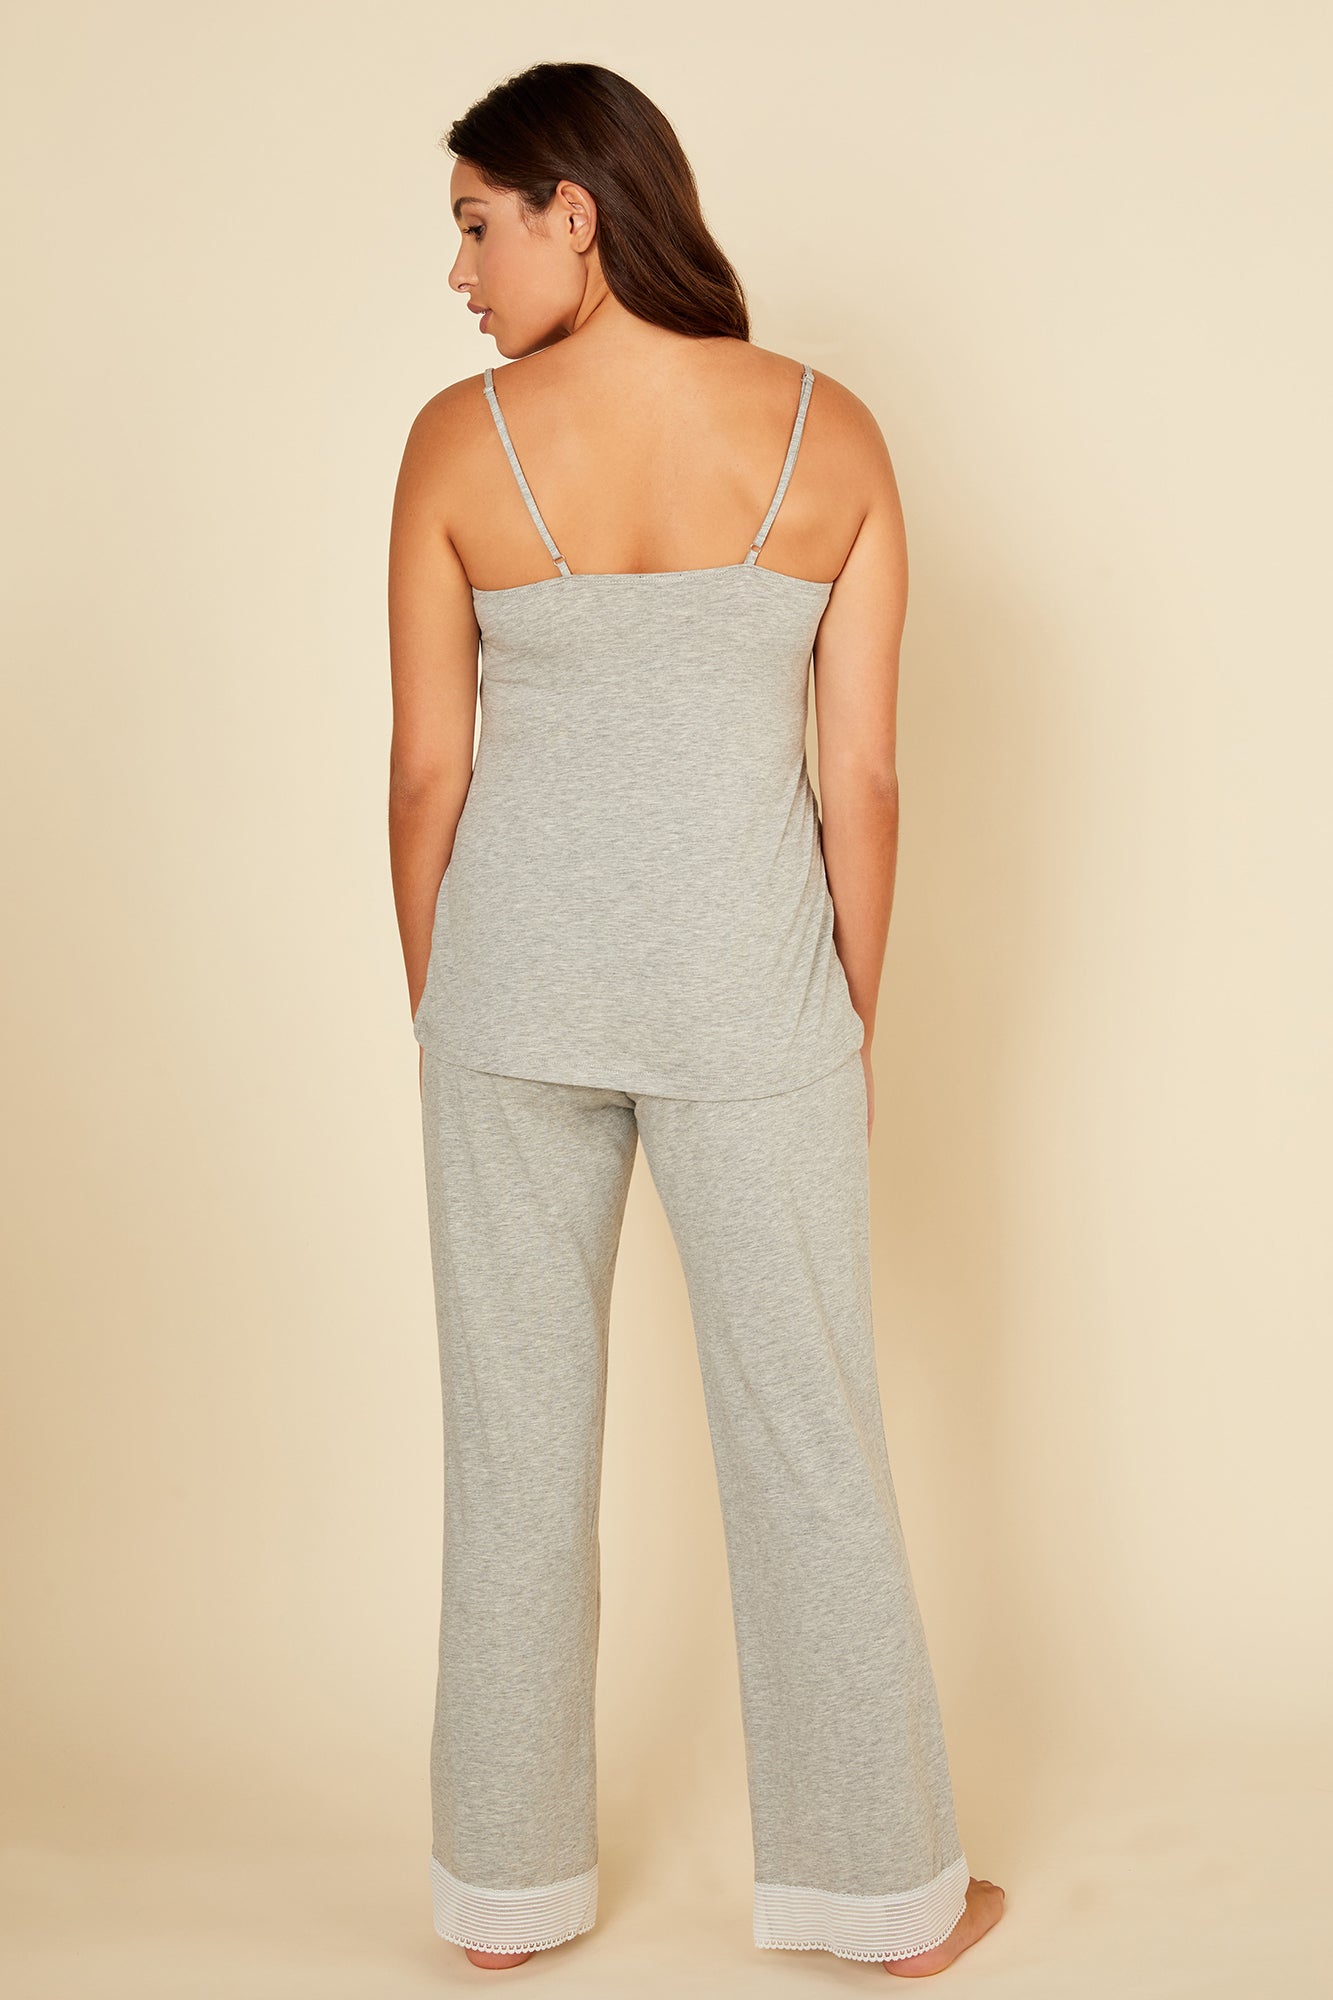 Cosabella, Ryleigh Camisole & Pant Pajama Set